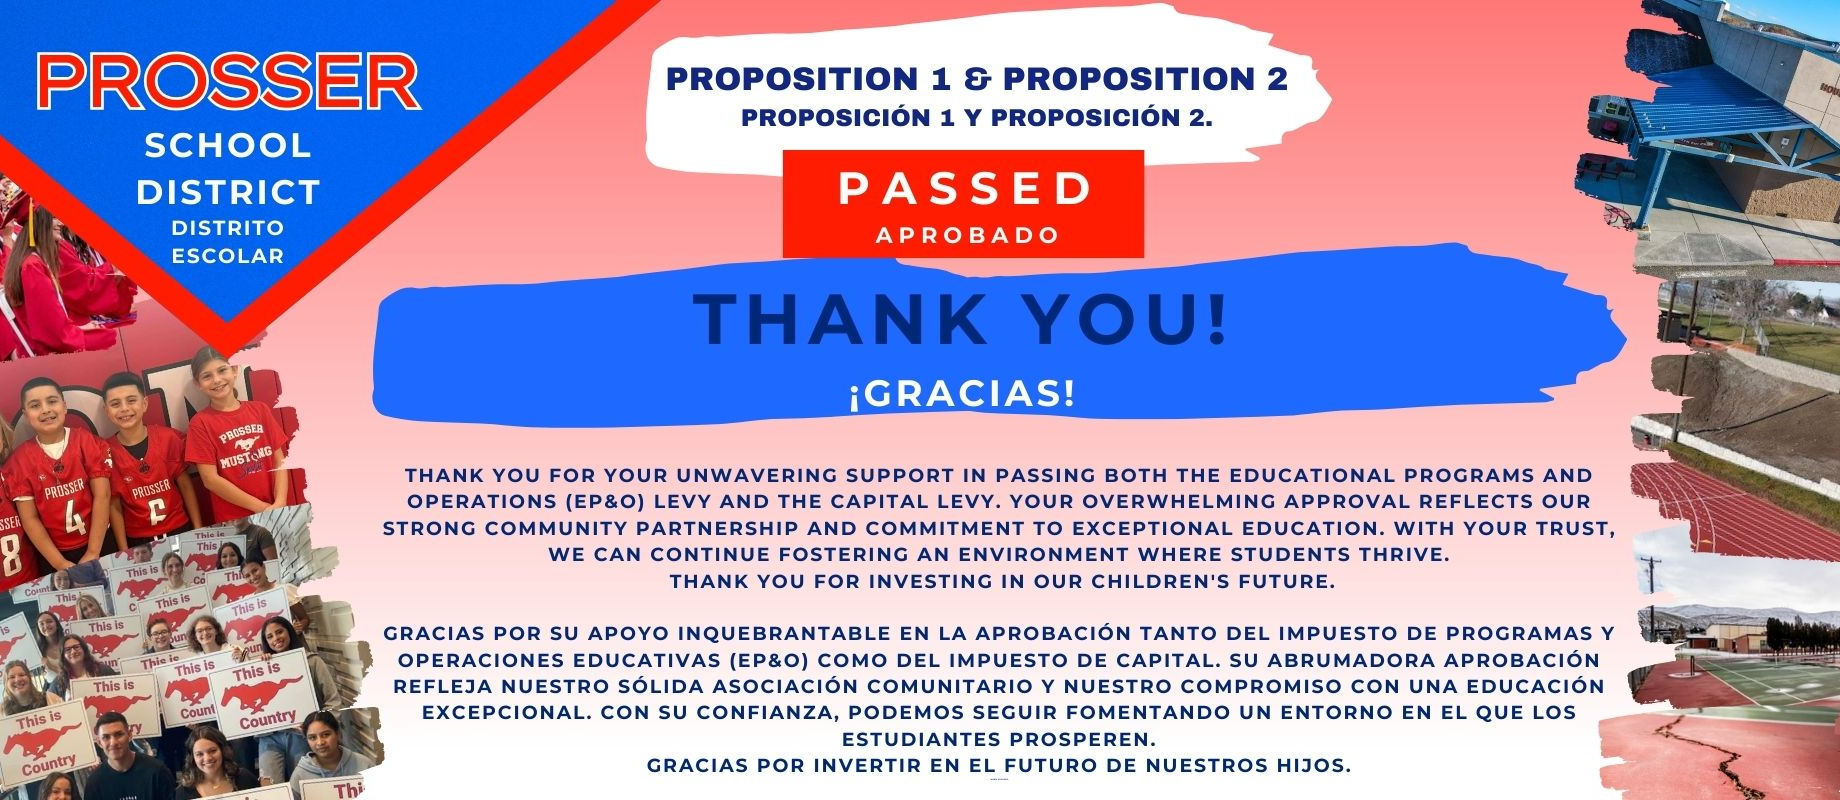 Proposition 1 & Proposition 2 Passed; Thank you